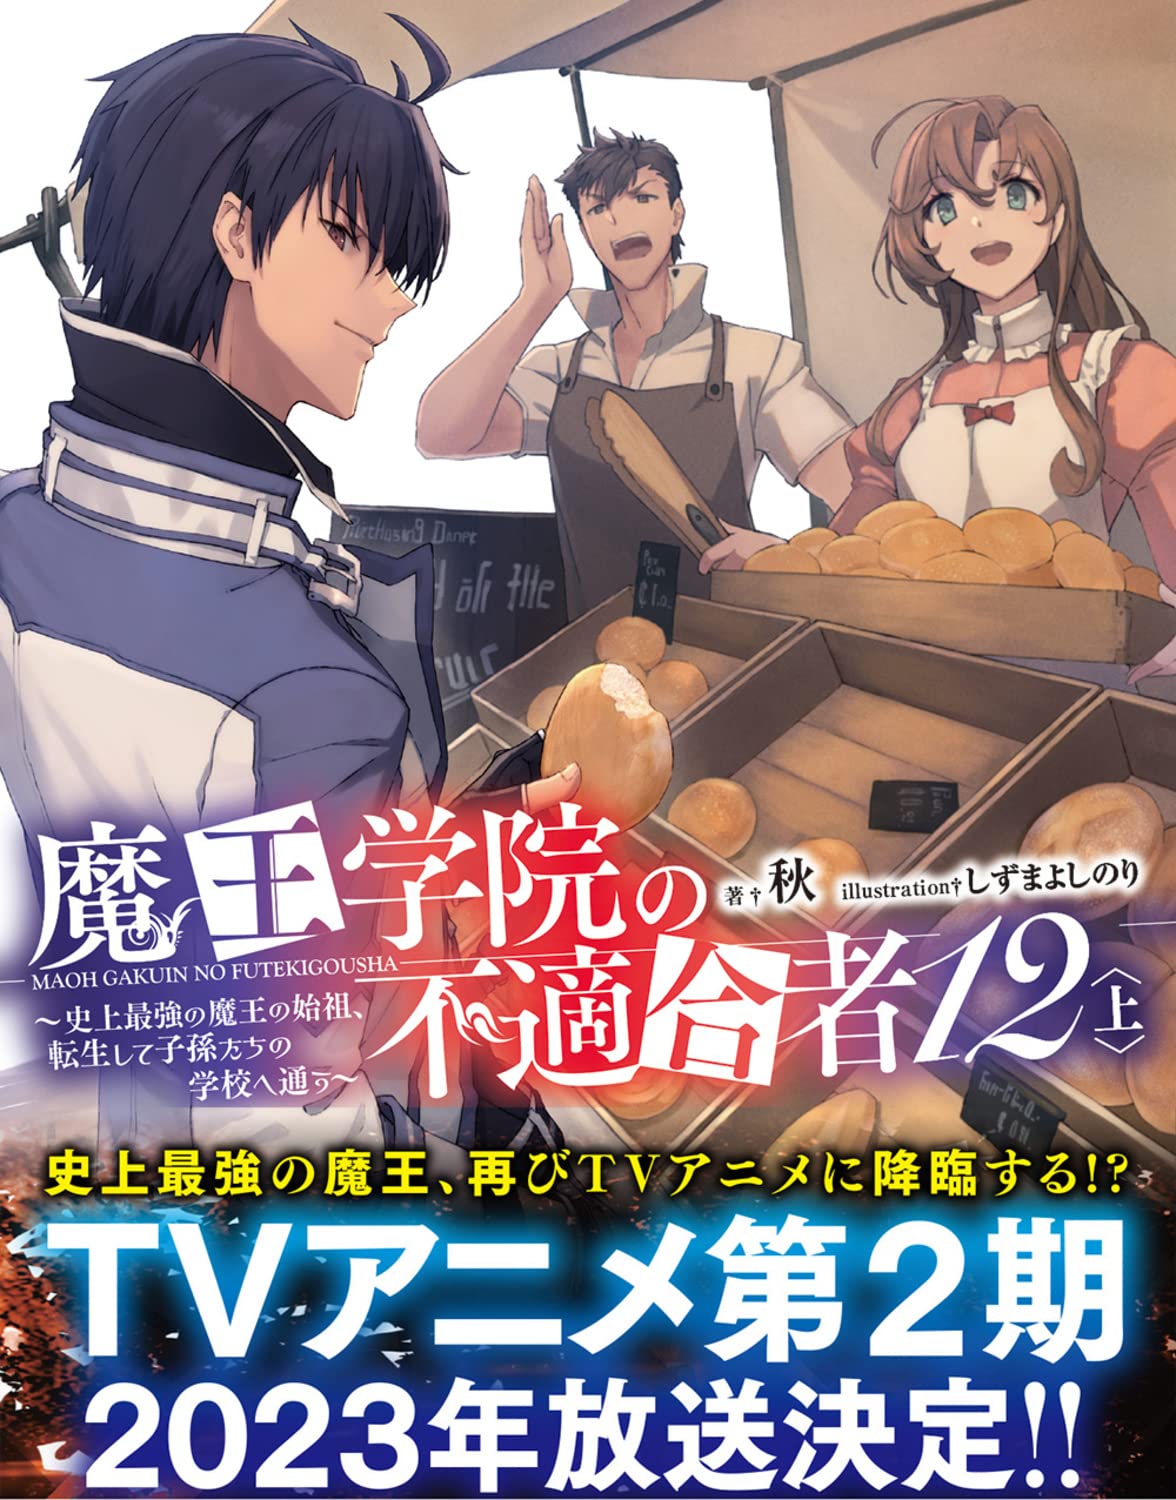 Maou Gakuin No Futekigousha (The Misfit of Demon King Academy) Vol.7 – will  be released on July 10, 2020 : r/MaouGakuin